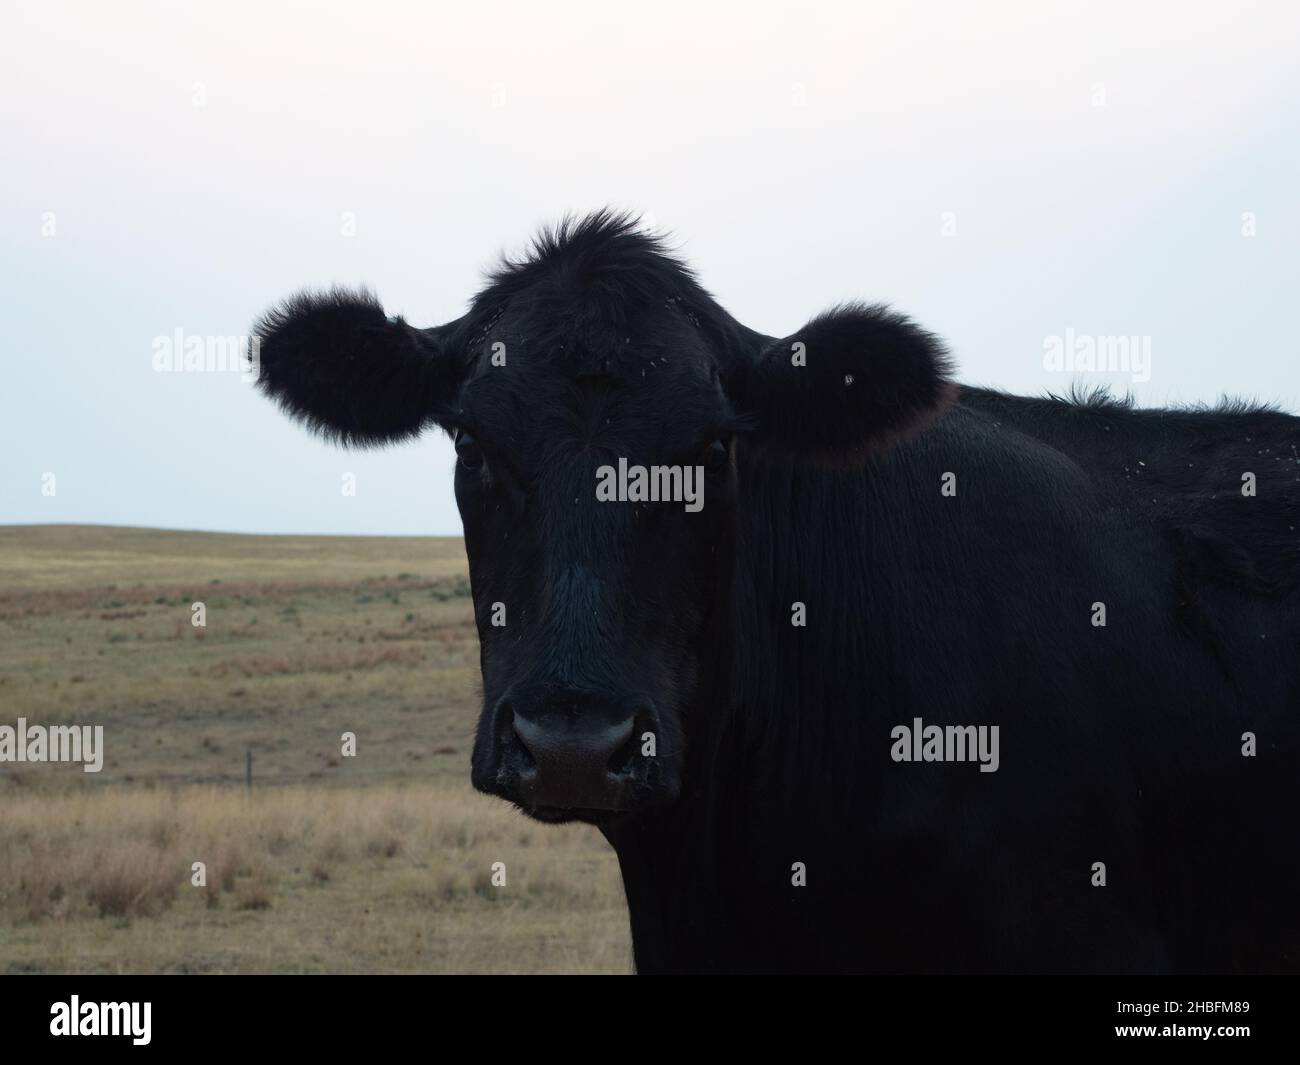 Close up of a Black Angus cow facing the camera with flies on its face. Photographed with a shallow depth of field. Stock Photo